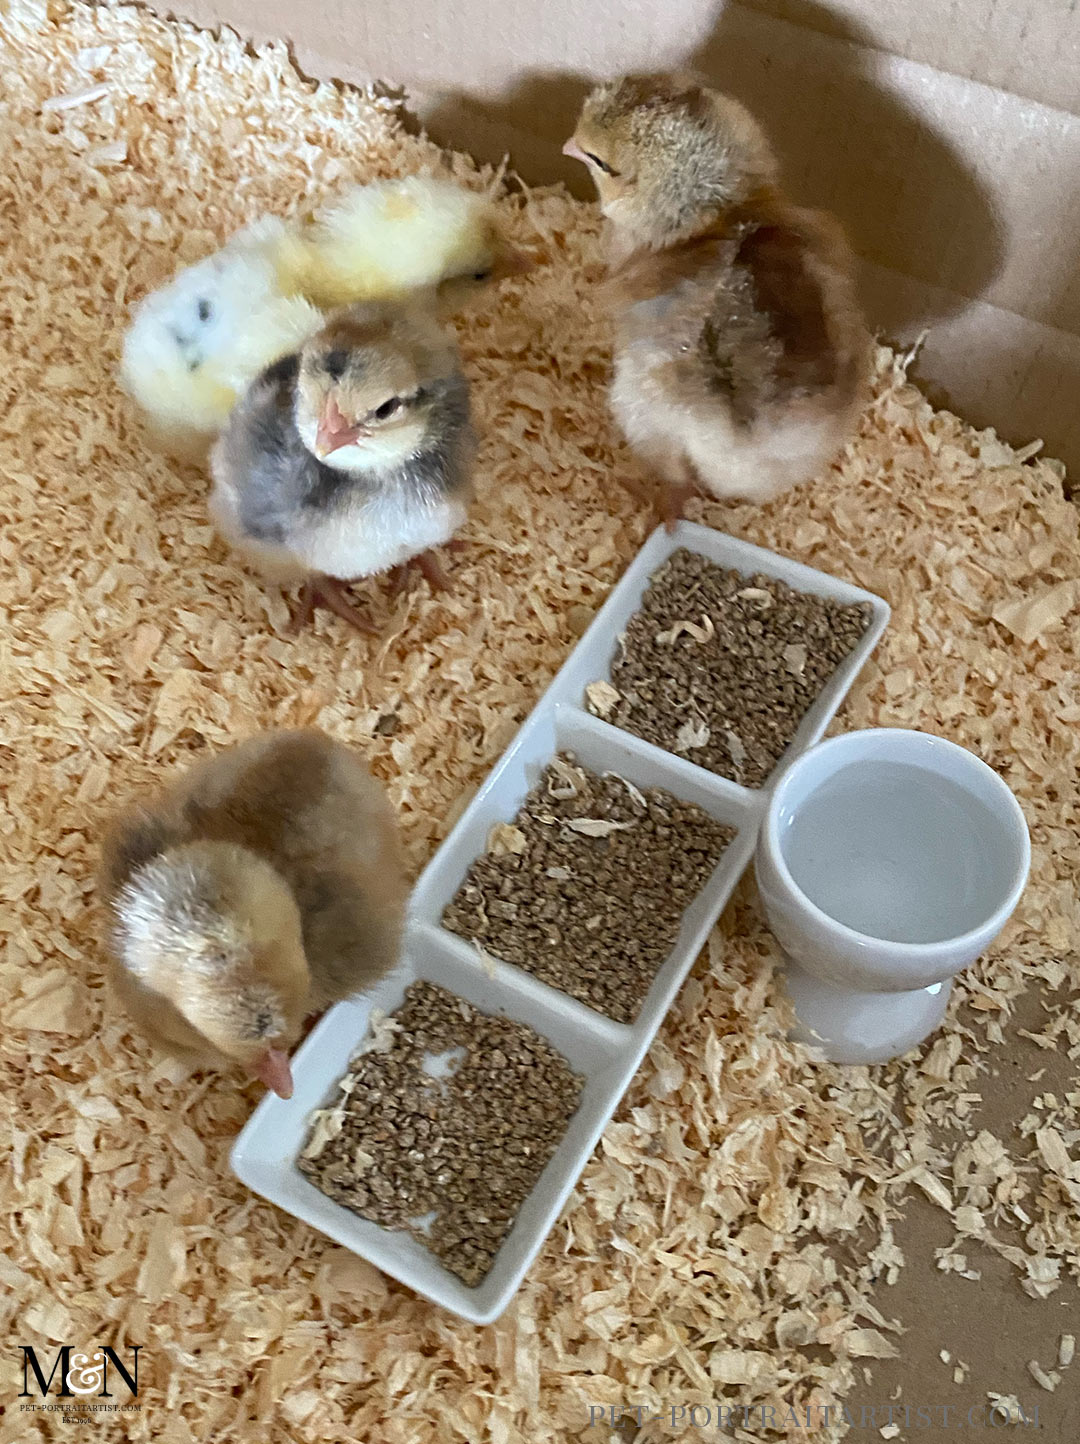 Baby chicks up and about eating!